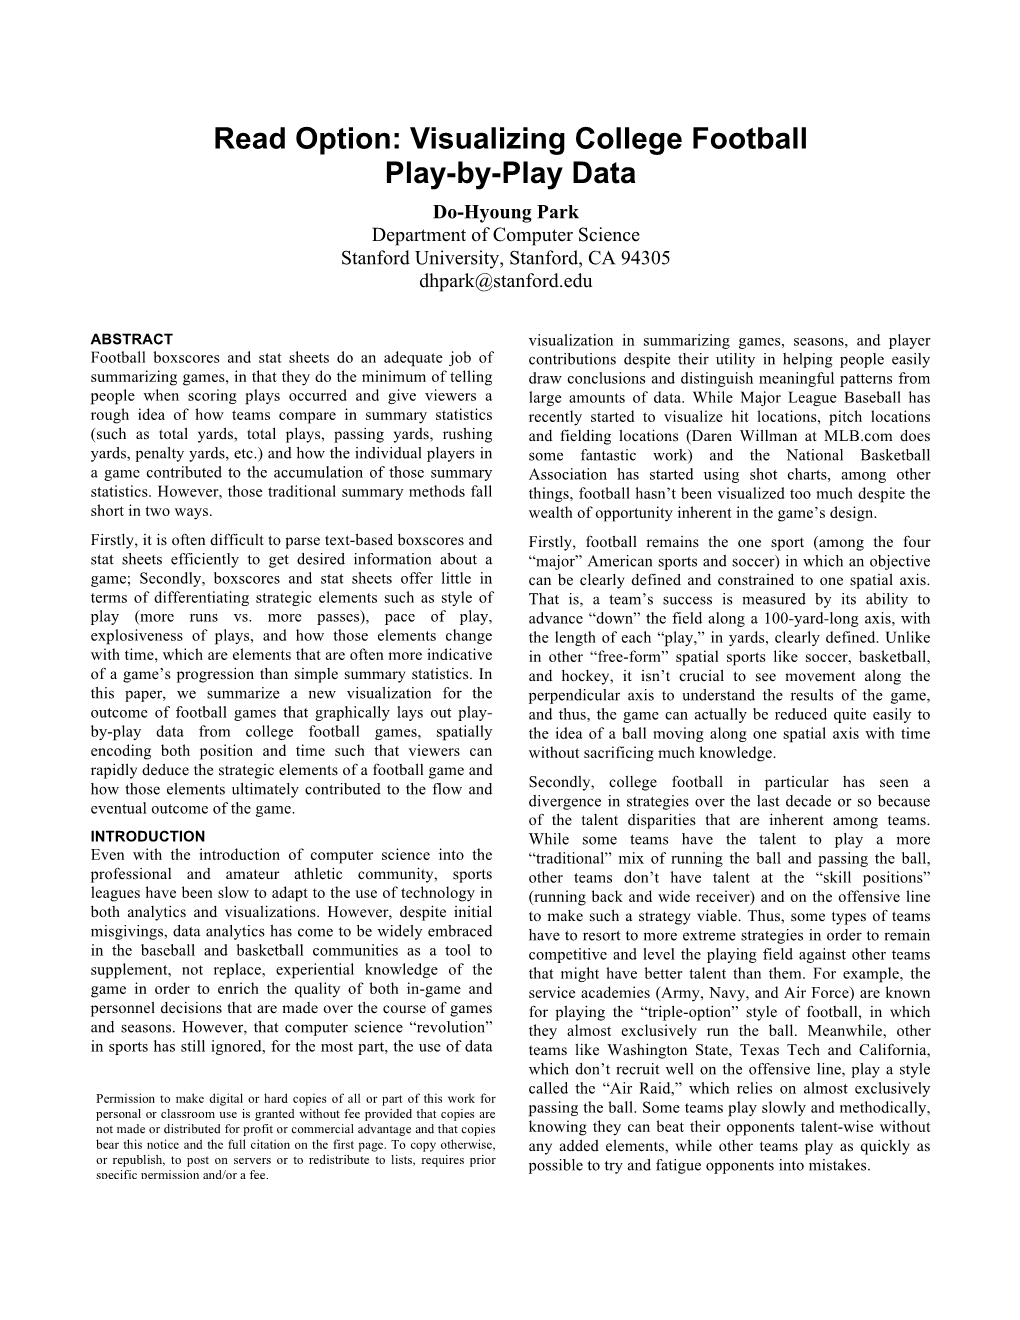 Read Option: Visualizing College Football Play-By-Play Data Do-Hyoung Park Department of Computer Science Stanford University, Stanford, CA 94305 Dhpark@Stanford.Edu